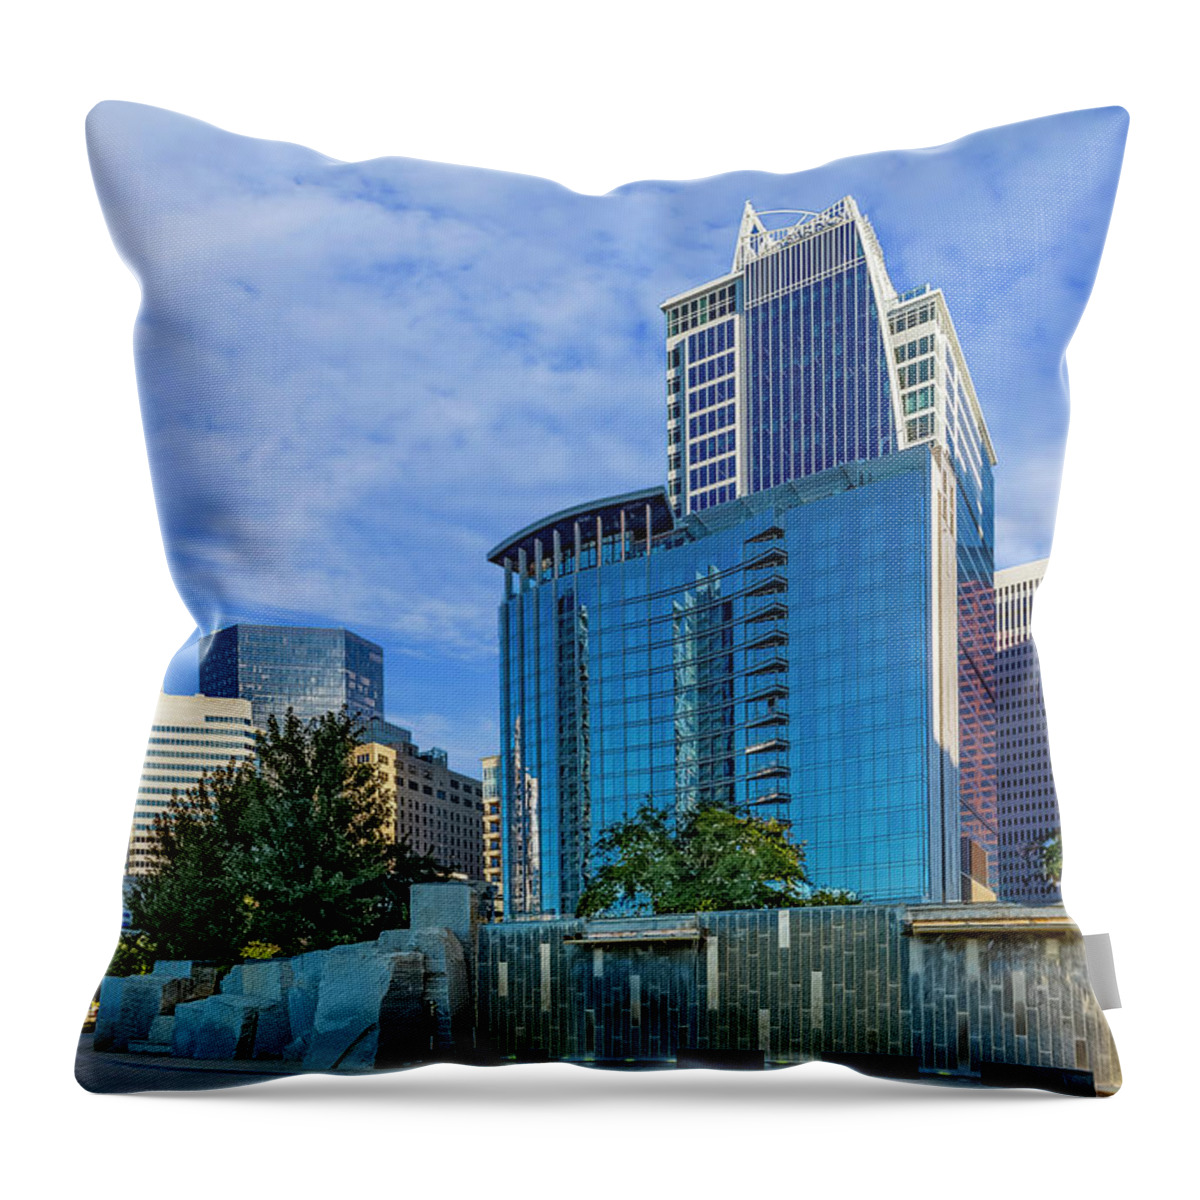 Charlotte Throw Pillow featuring the digital art Romare Bearden Park 6 by SnapHappy Photos